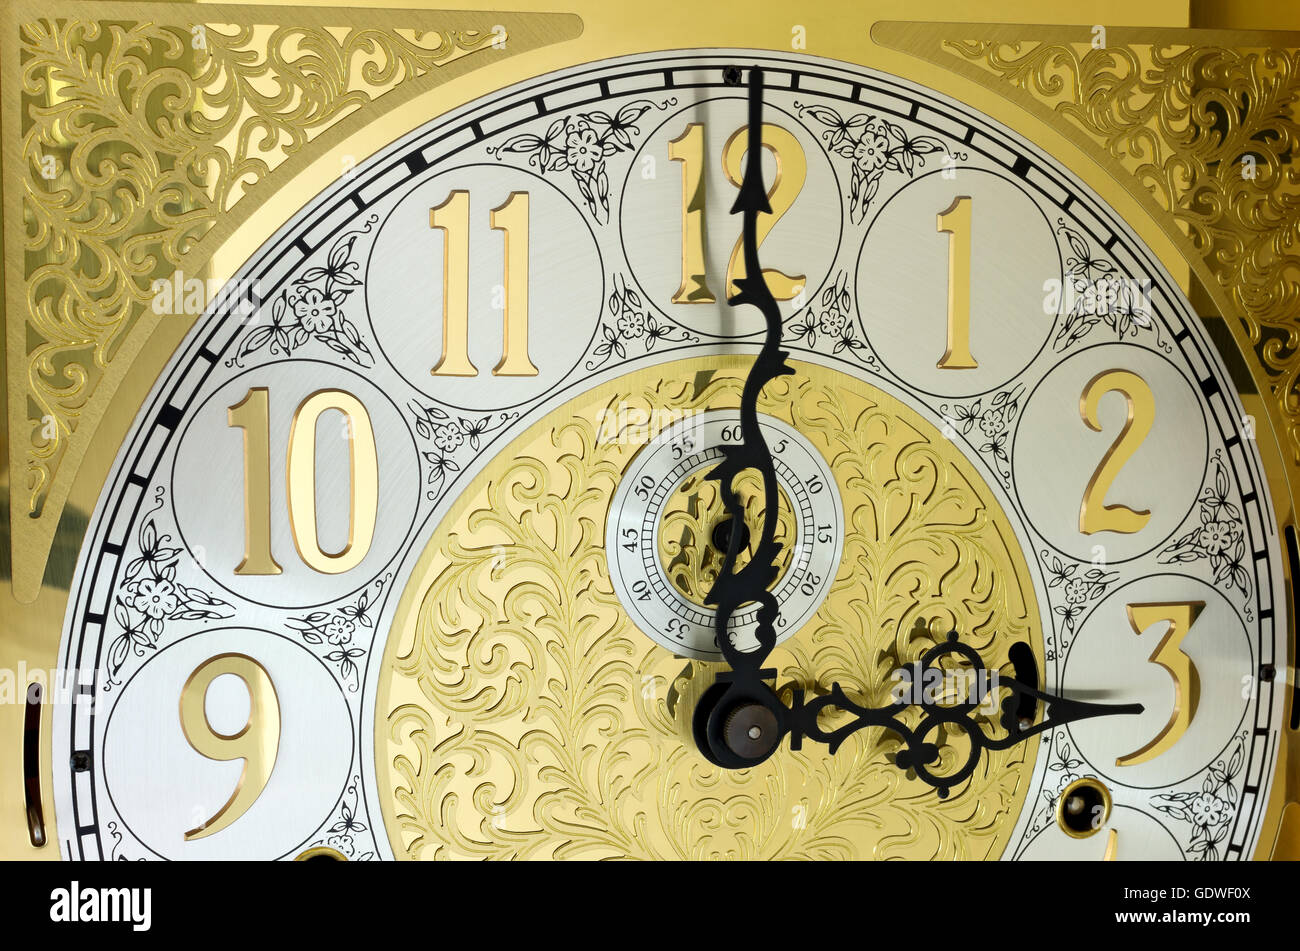 ornate brass engraved grandfather clock face with arabic numerals and hands on three o'clock Stock Photo